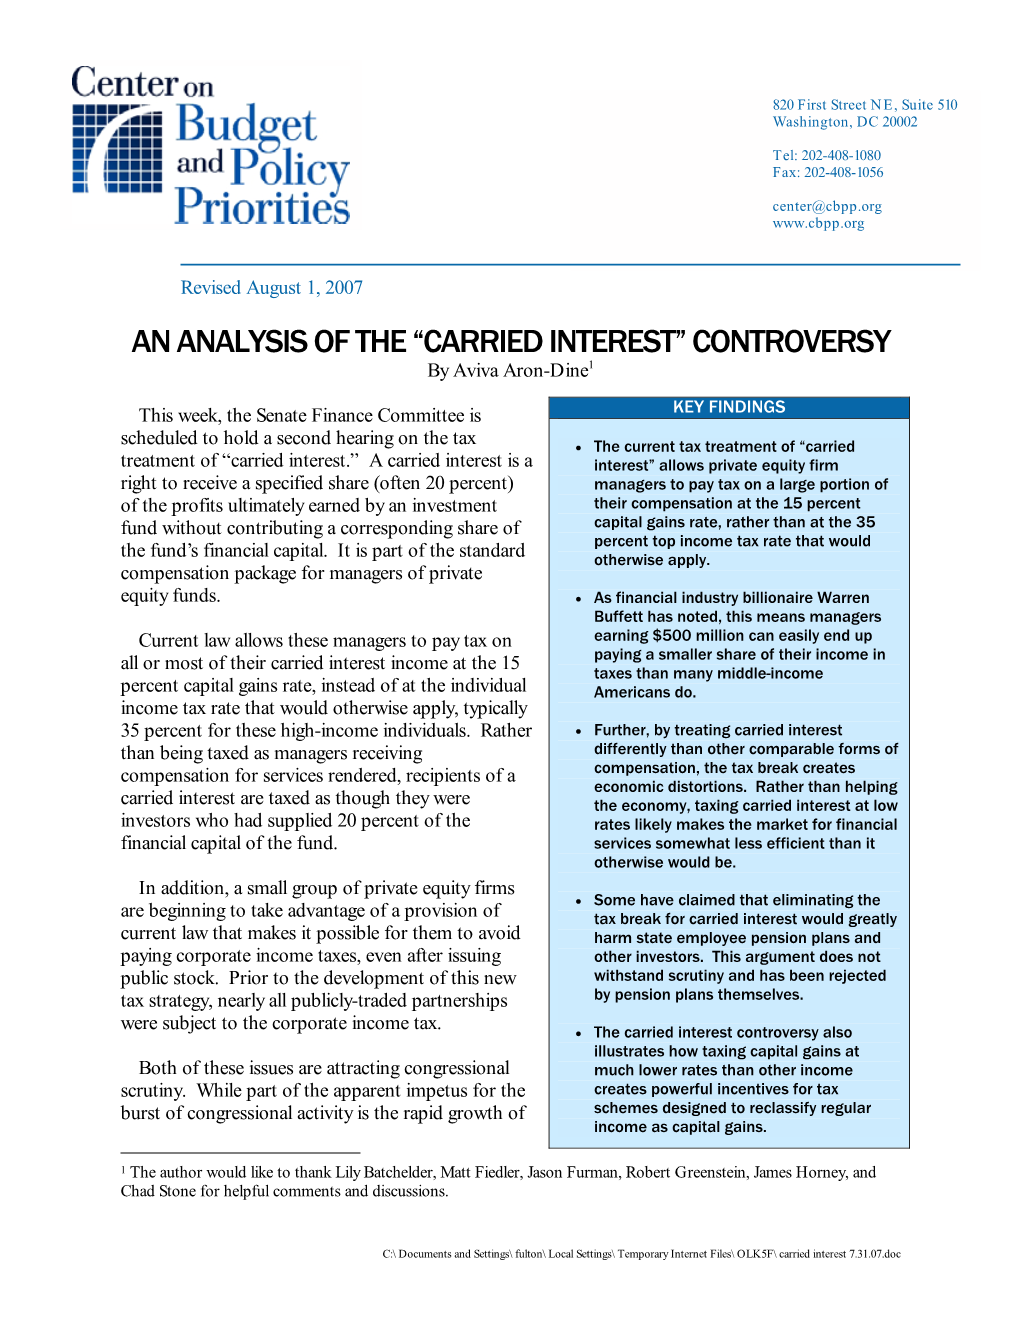 AN ANALYSIS of the “CARRIED INTEREST” CONTROVERSY by Aviva Aron-Dine1